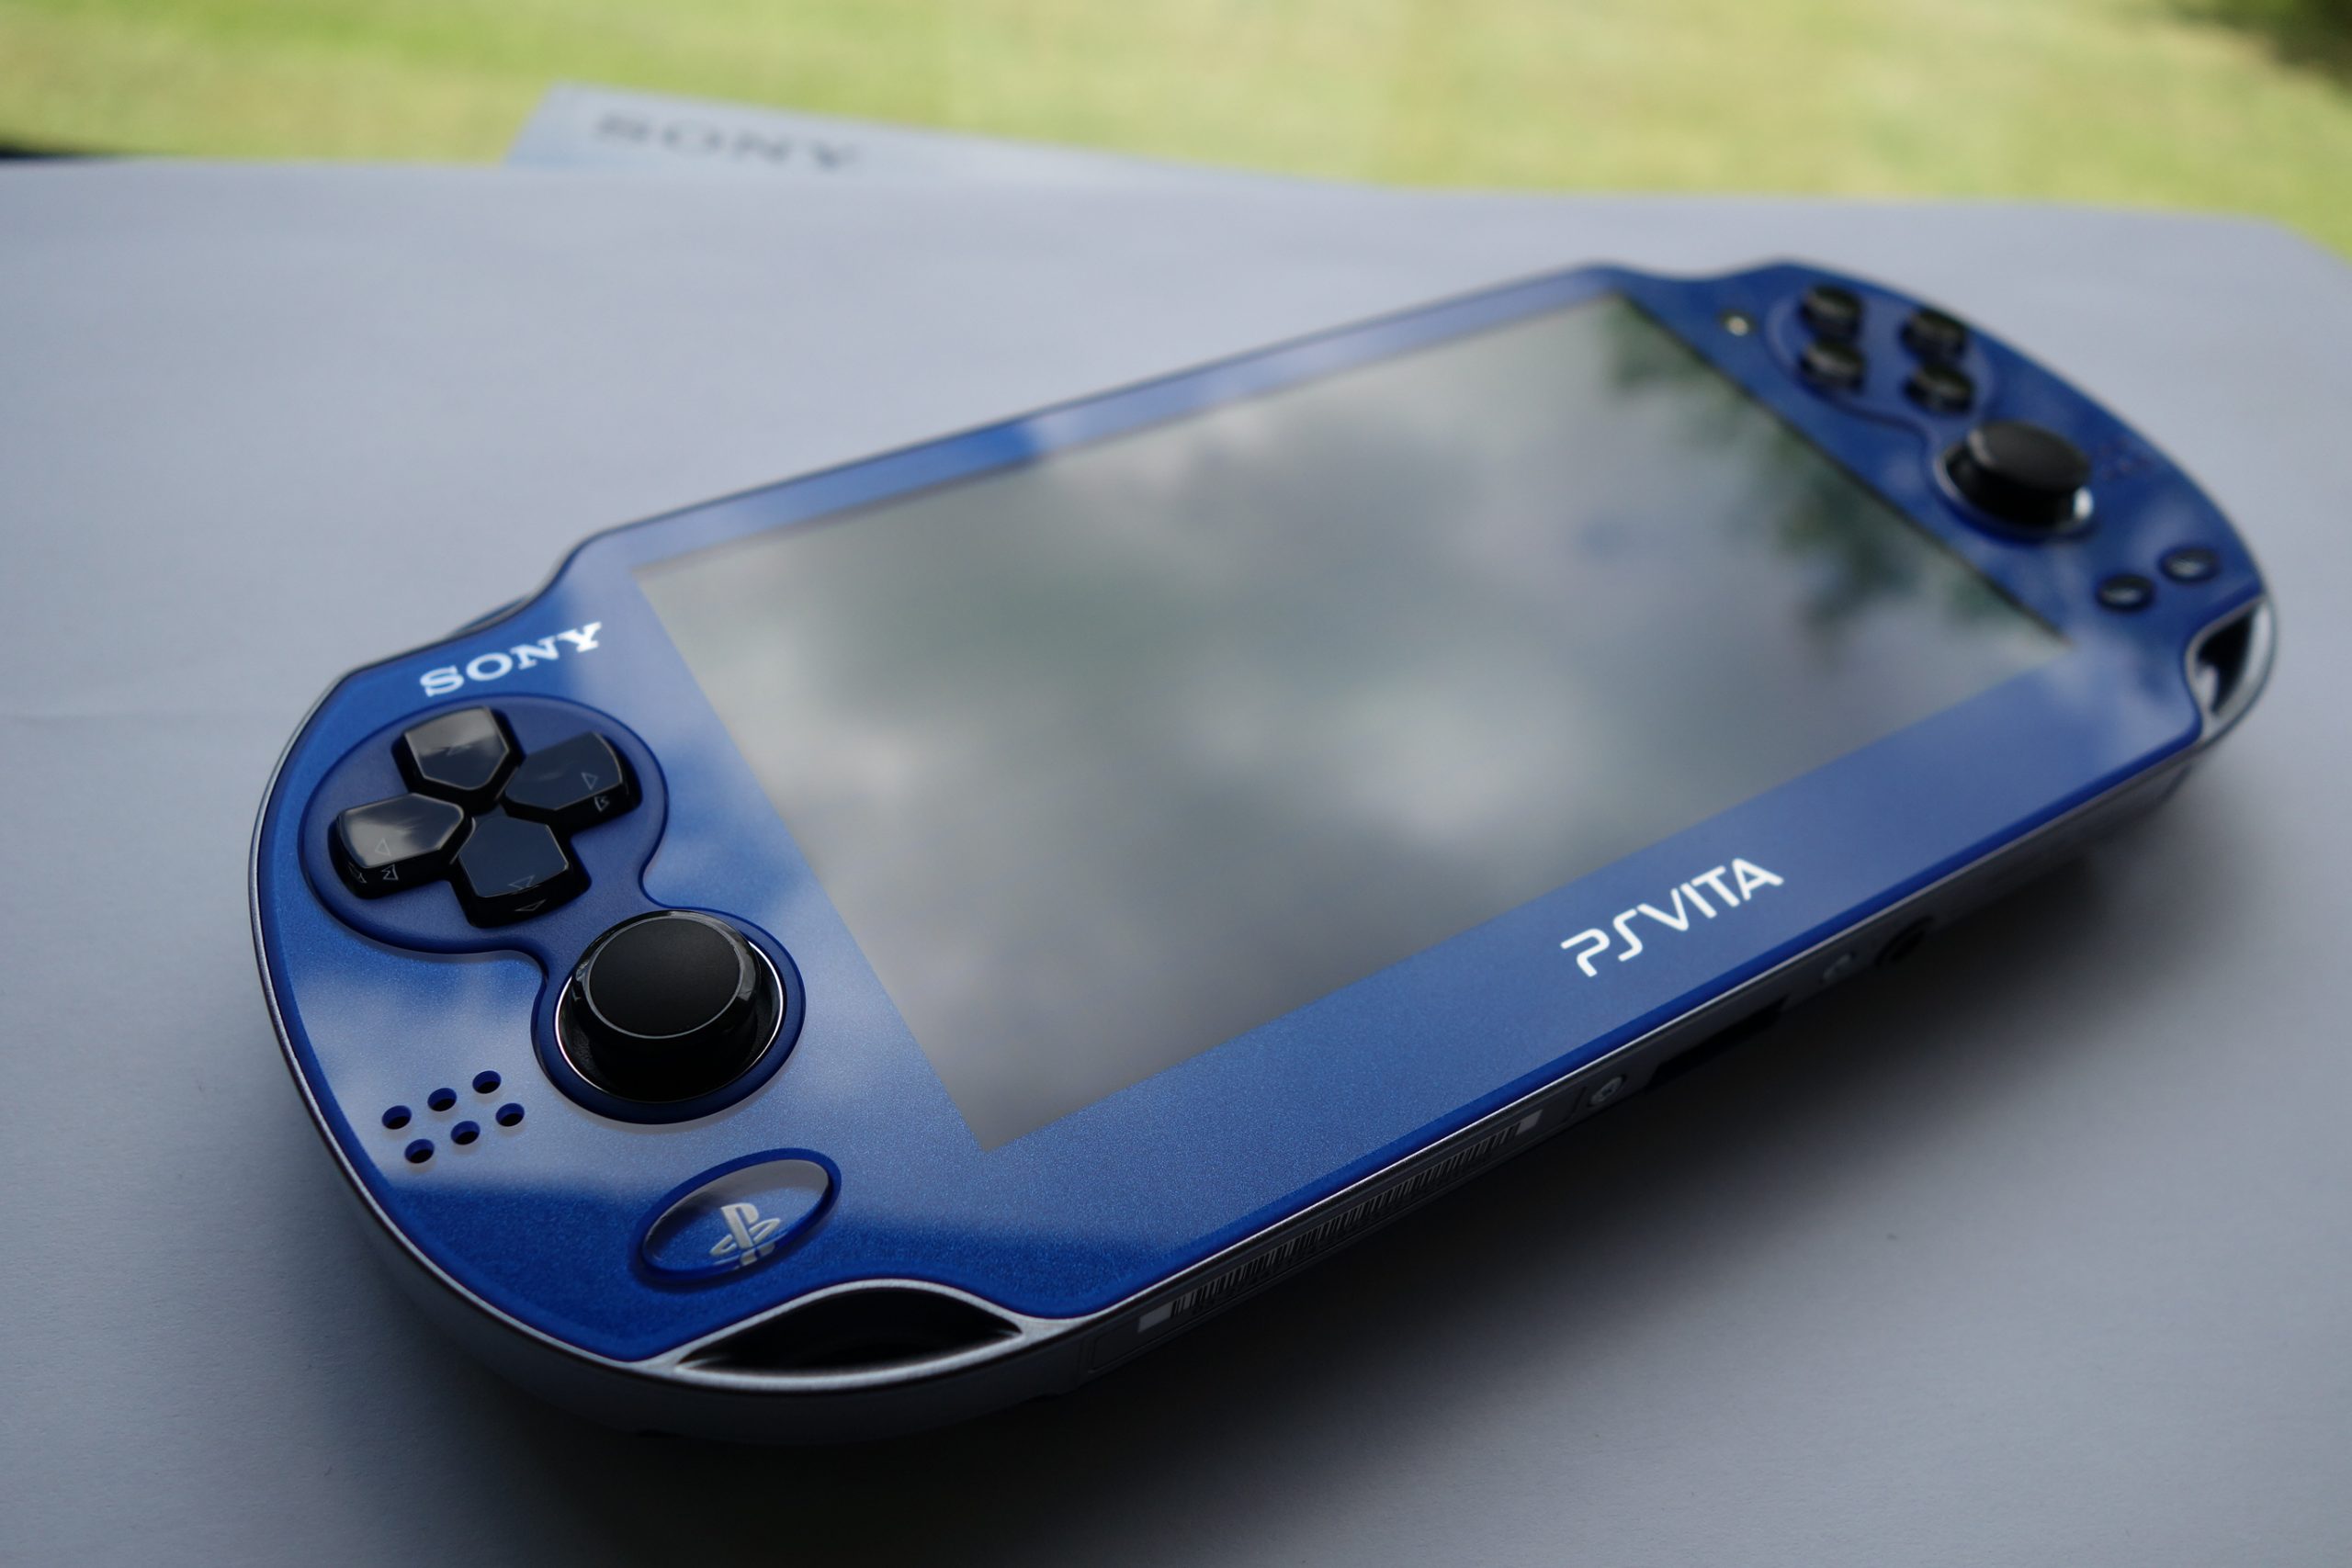 Death Of The Ps Vita One Year Later Vita Player The One Stop Resource For Ps Vita Owners